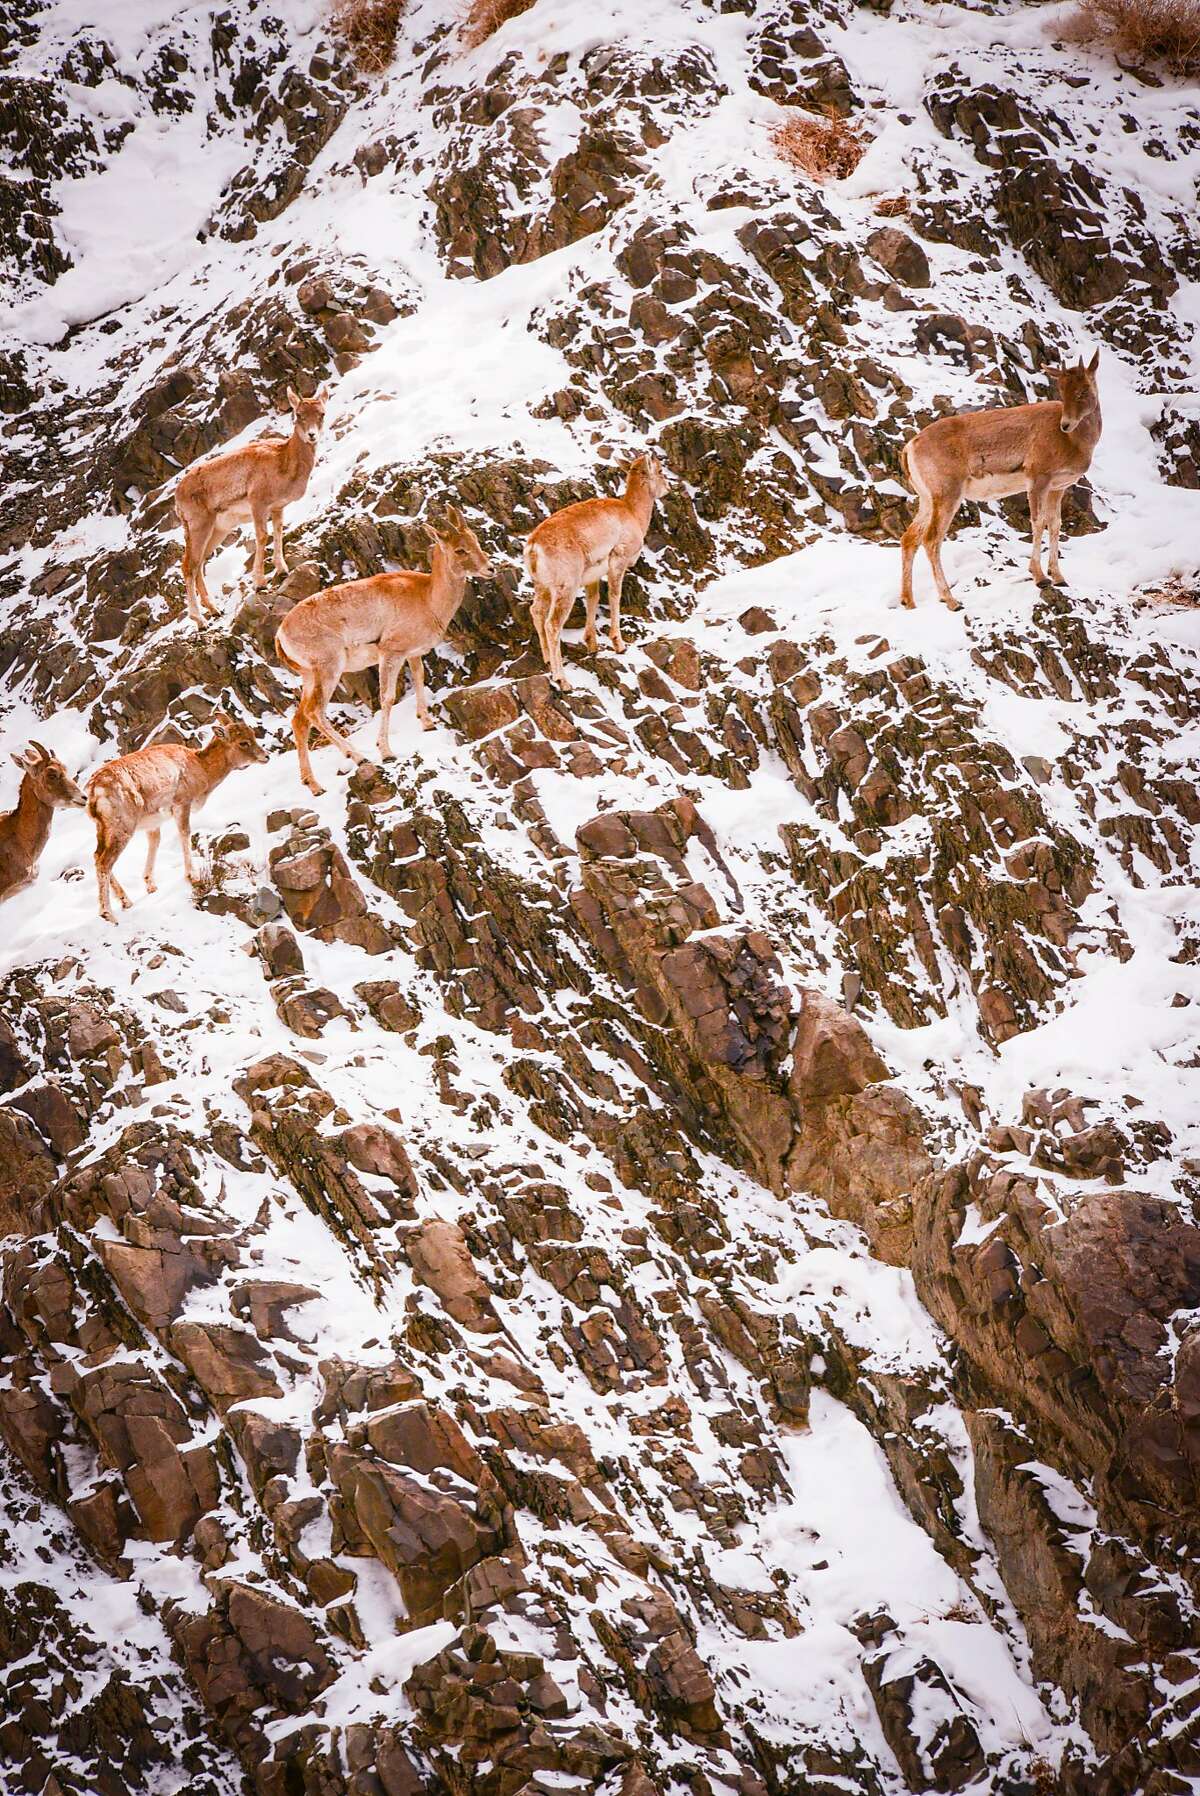 Wild sheep in Ladakh, from bharal to urial to ibex, have to contend with steep slopes in escaping snow leopards.